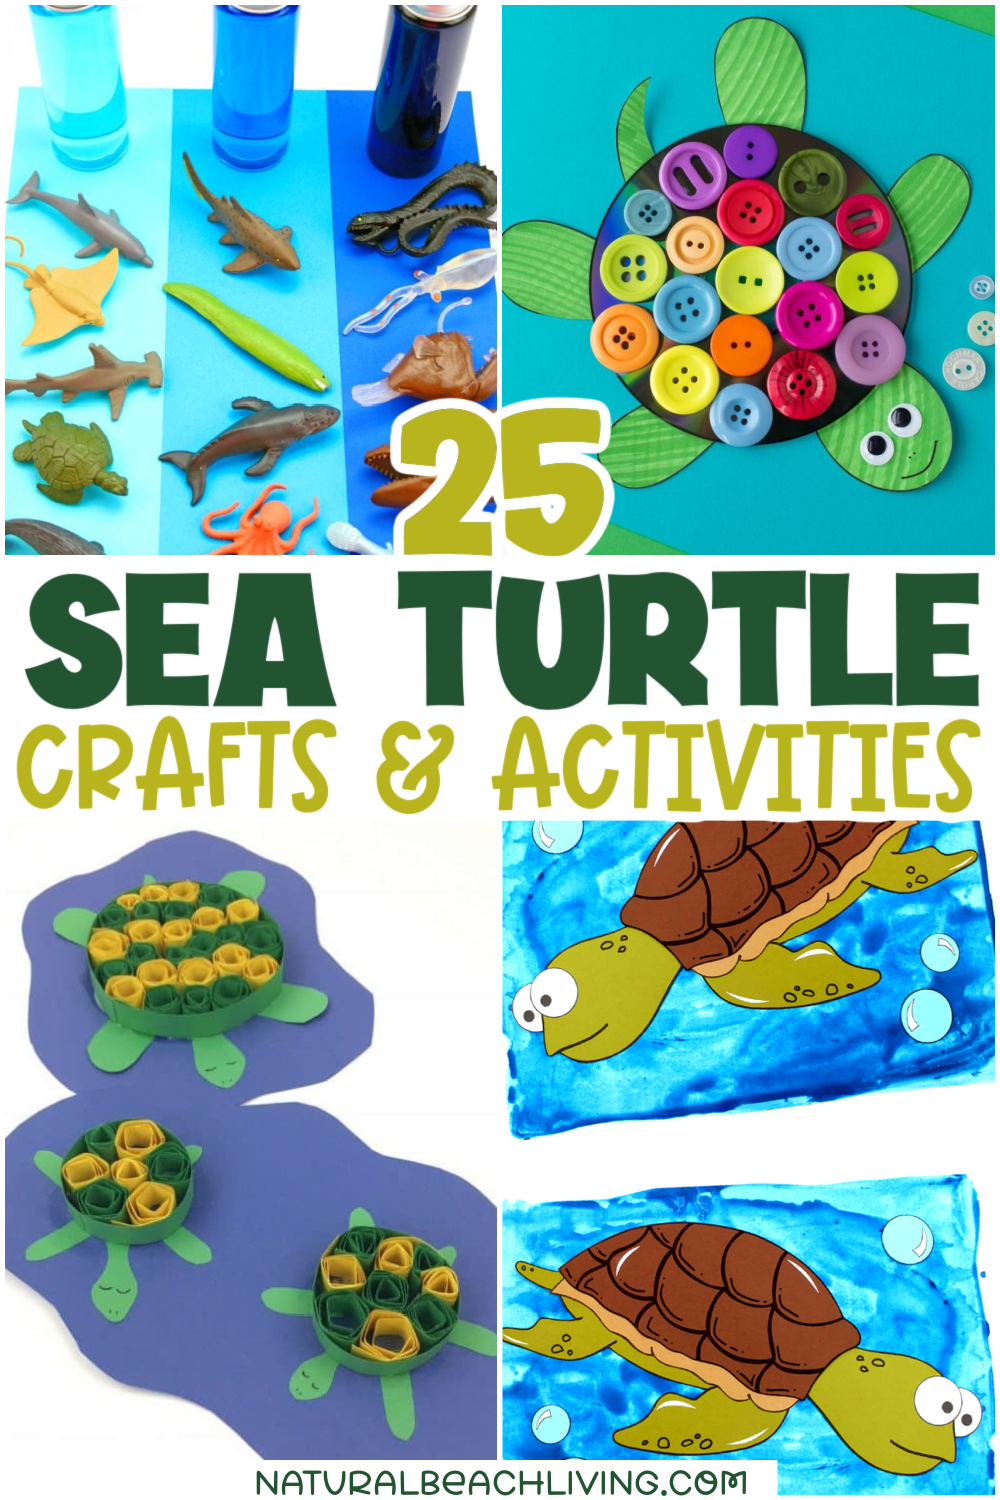 35+ Summer Preschool Themes and Preschool Activities, Parents and Teachers love these hands on activities and Summer Themes for Preschool. Find Free Printables and Preschool Lesson Plans, over 100 Summer Lesson Plans for Preschoolers and Summer Themes, including Ocean activities for kids, Under the Sea theme, preschool crafts, Preschool Science, Preschool Shark Activities and Tons of Pre-K activities and printables, Free Preschool Weekly Themes